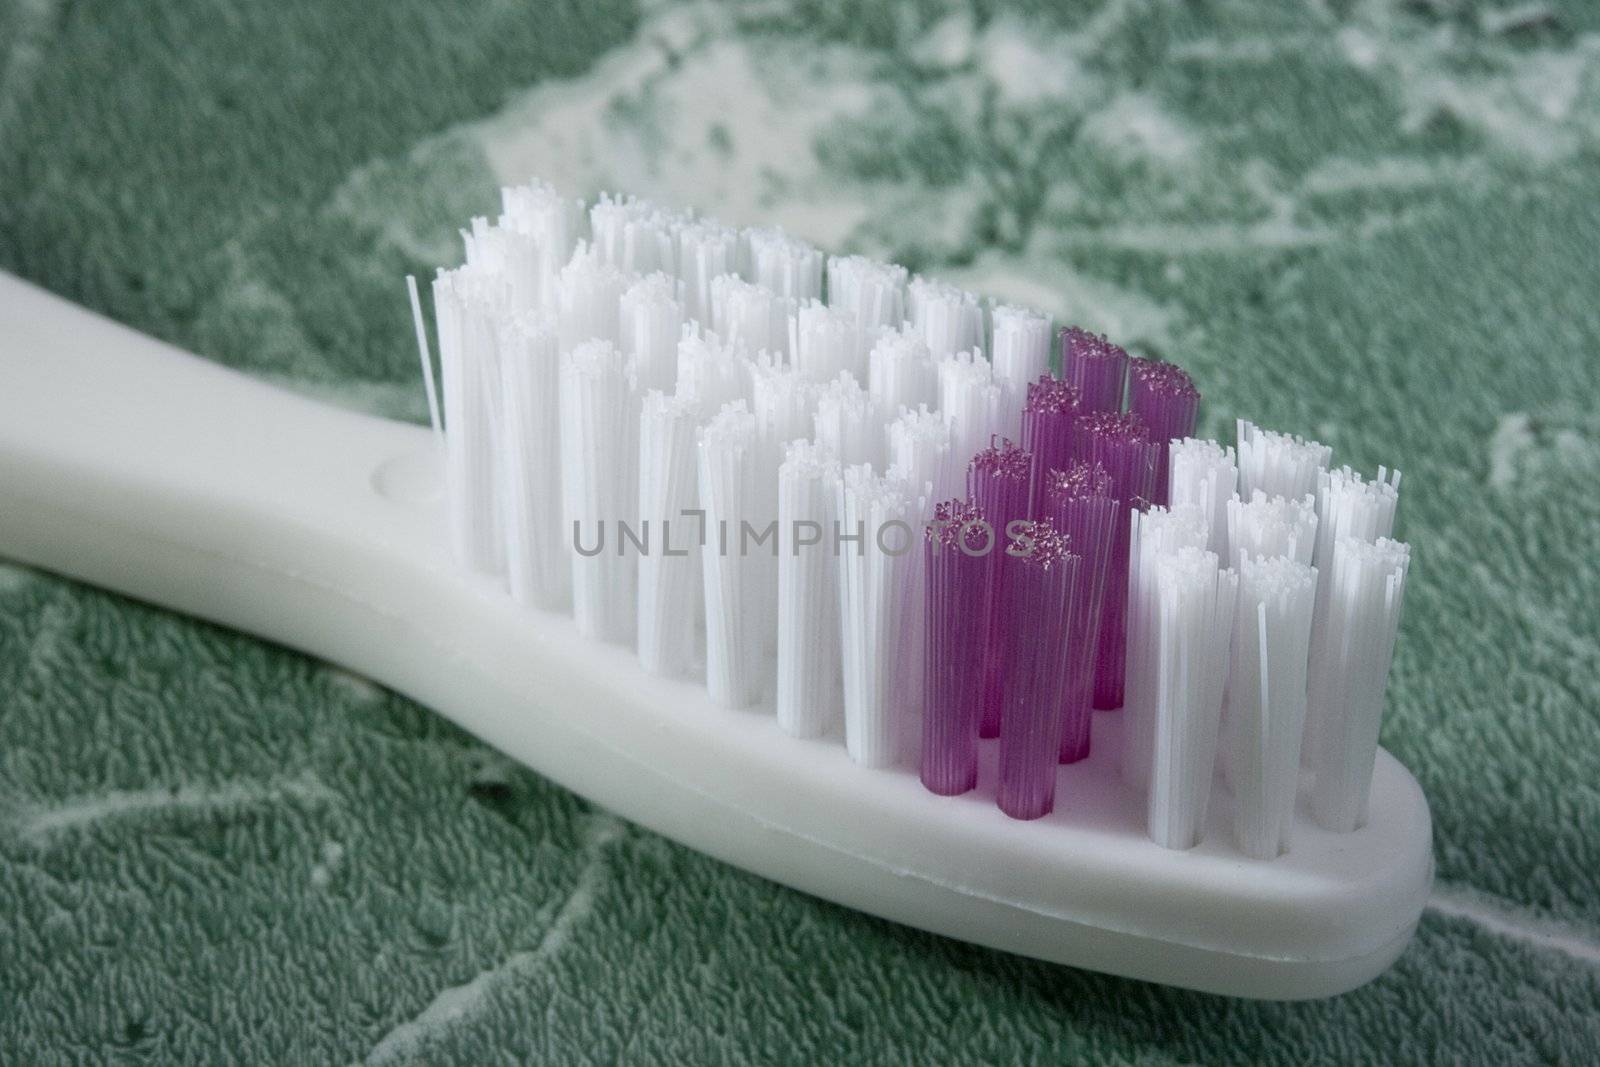 White and purple toothbrush on the green countertop.